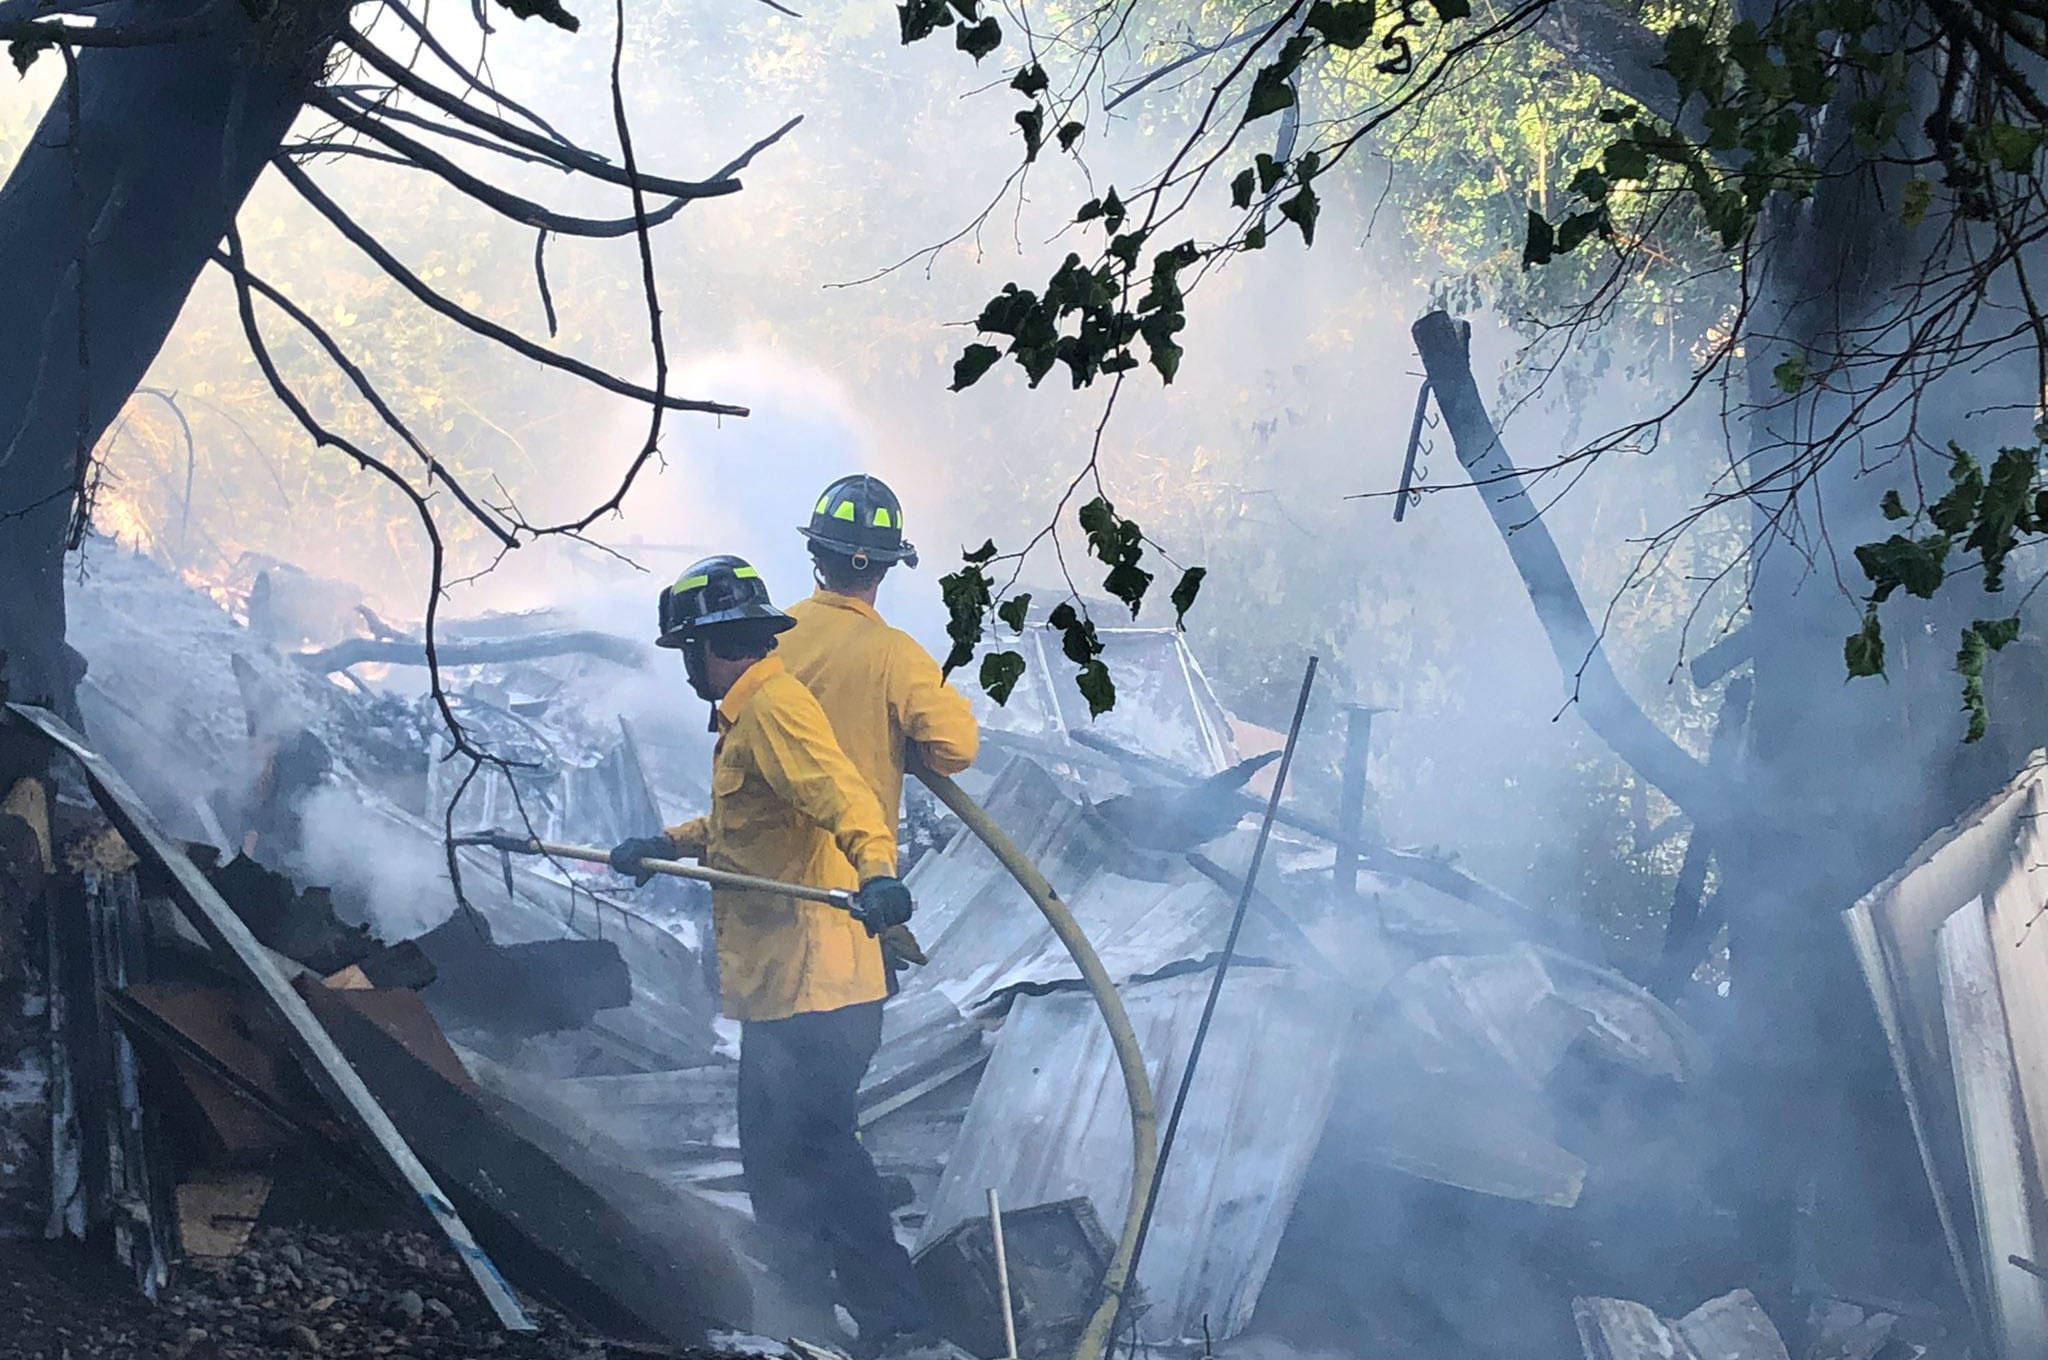 Firefighters take on a fire June 29 at a homeless camp along Frager Road in Kent, about 1 mile south of Meeker Street. COURTESY PHOTO, Puget Sound Fire